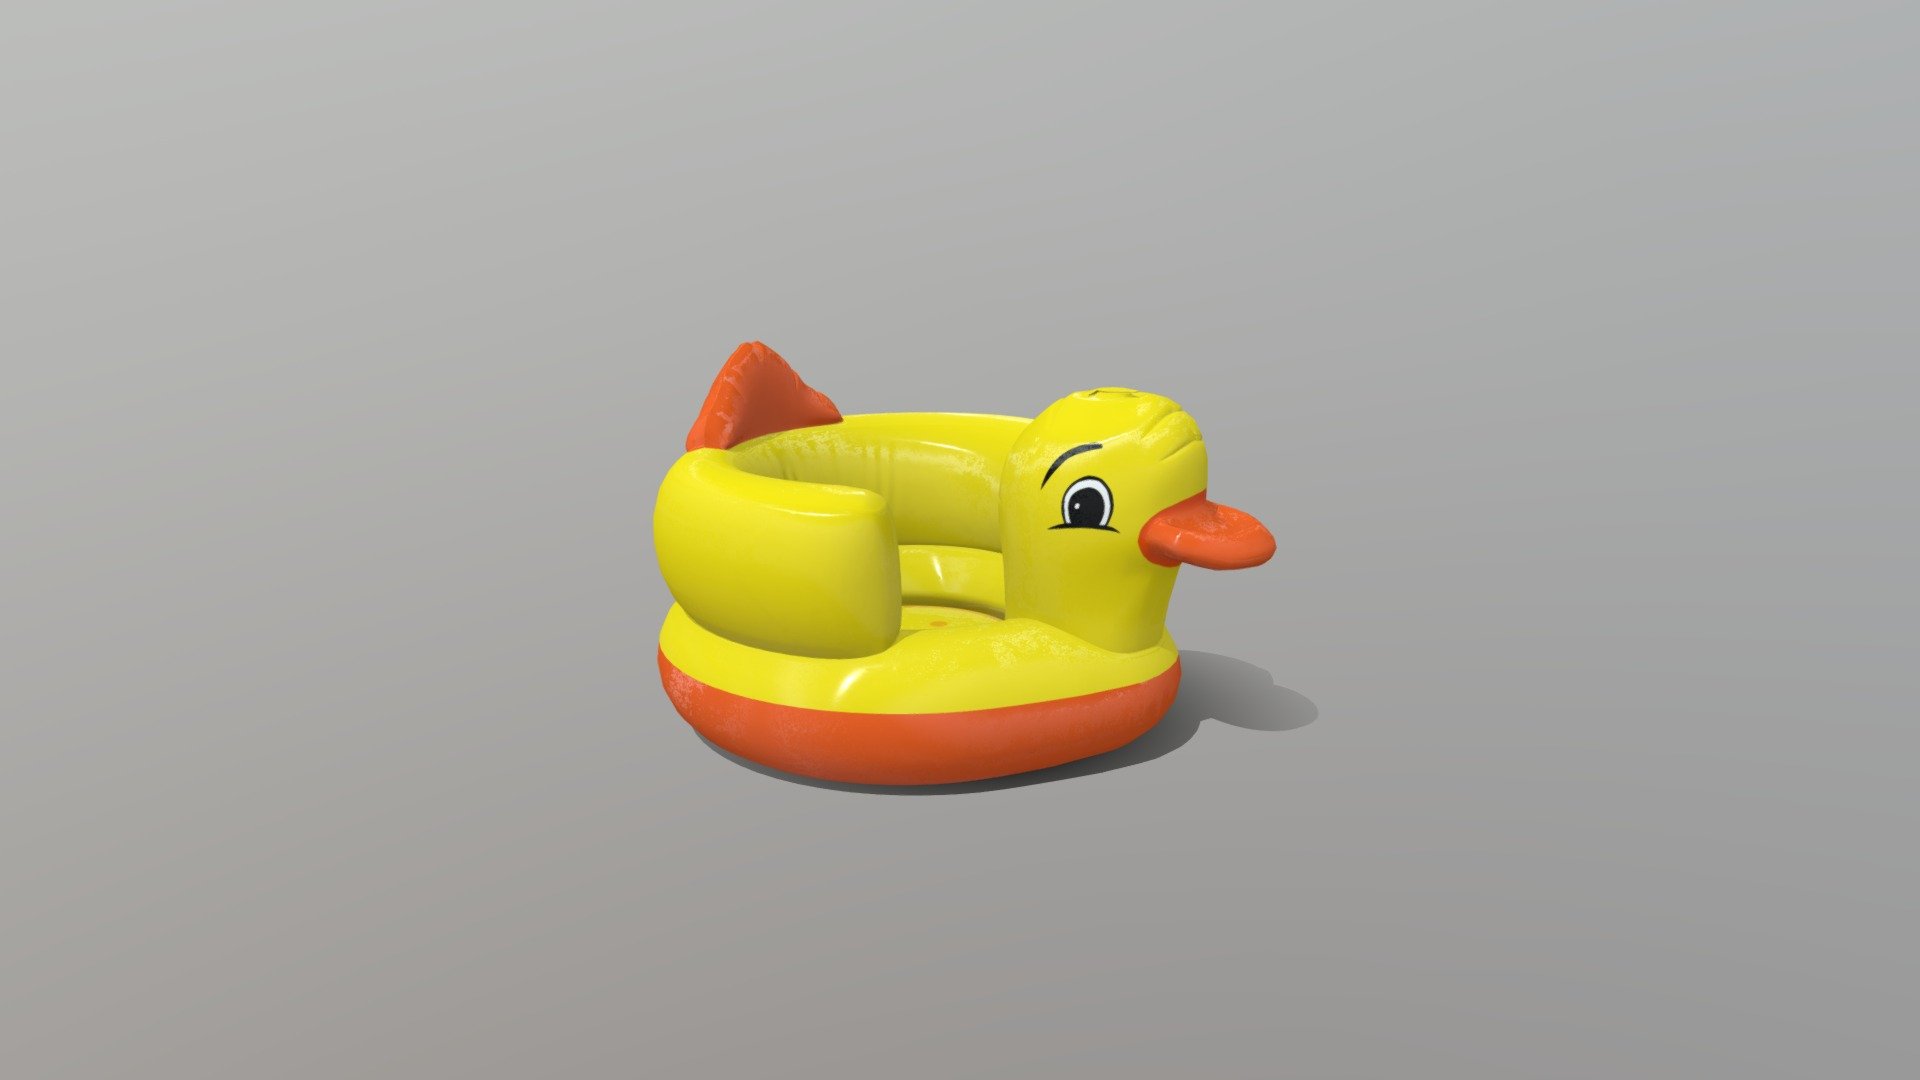 this is PBR low poly 3D model Inflatable horse Toys for Kids playing, can used on Augmented Reality and Virtual Reality

included : 4K Textures FBX ( and texture ) OBJ ( And texture ) and 3ds

Albedo
Metalness
Roughness
Ambient occlusion
Normal map
Opacity

Poly = 3.699 Tris = 7.026 - Inflatable Duck - 3D model by prase 3d model